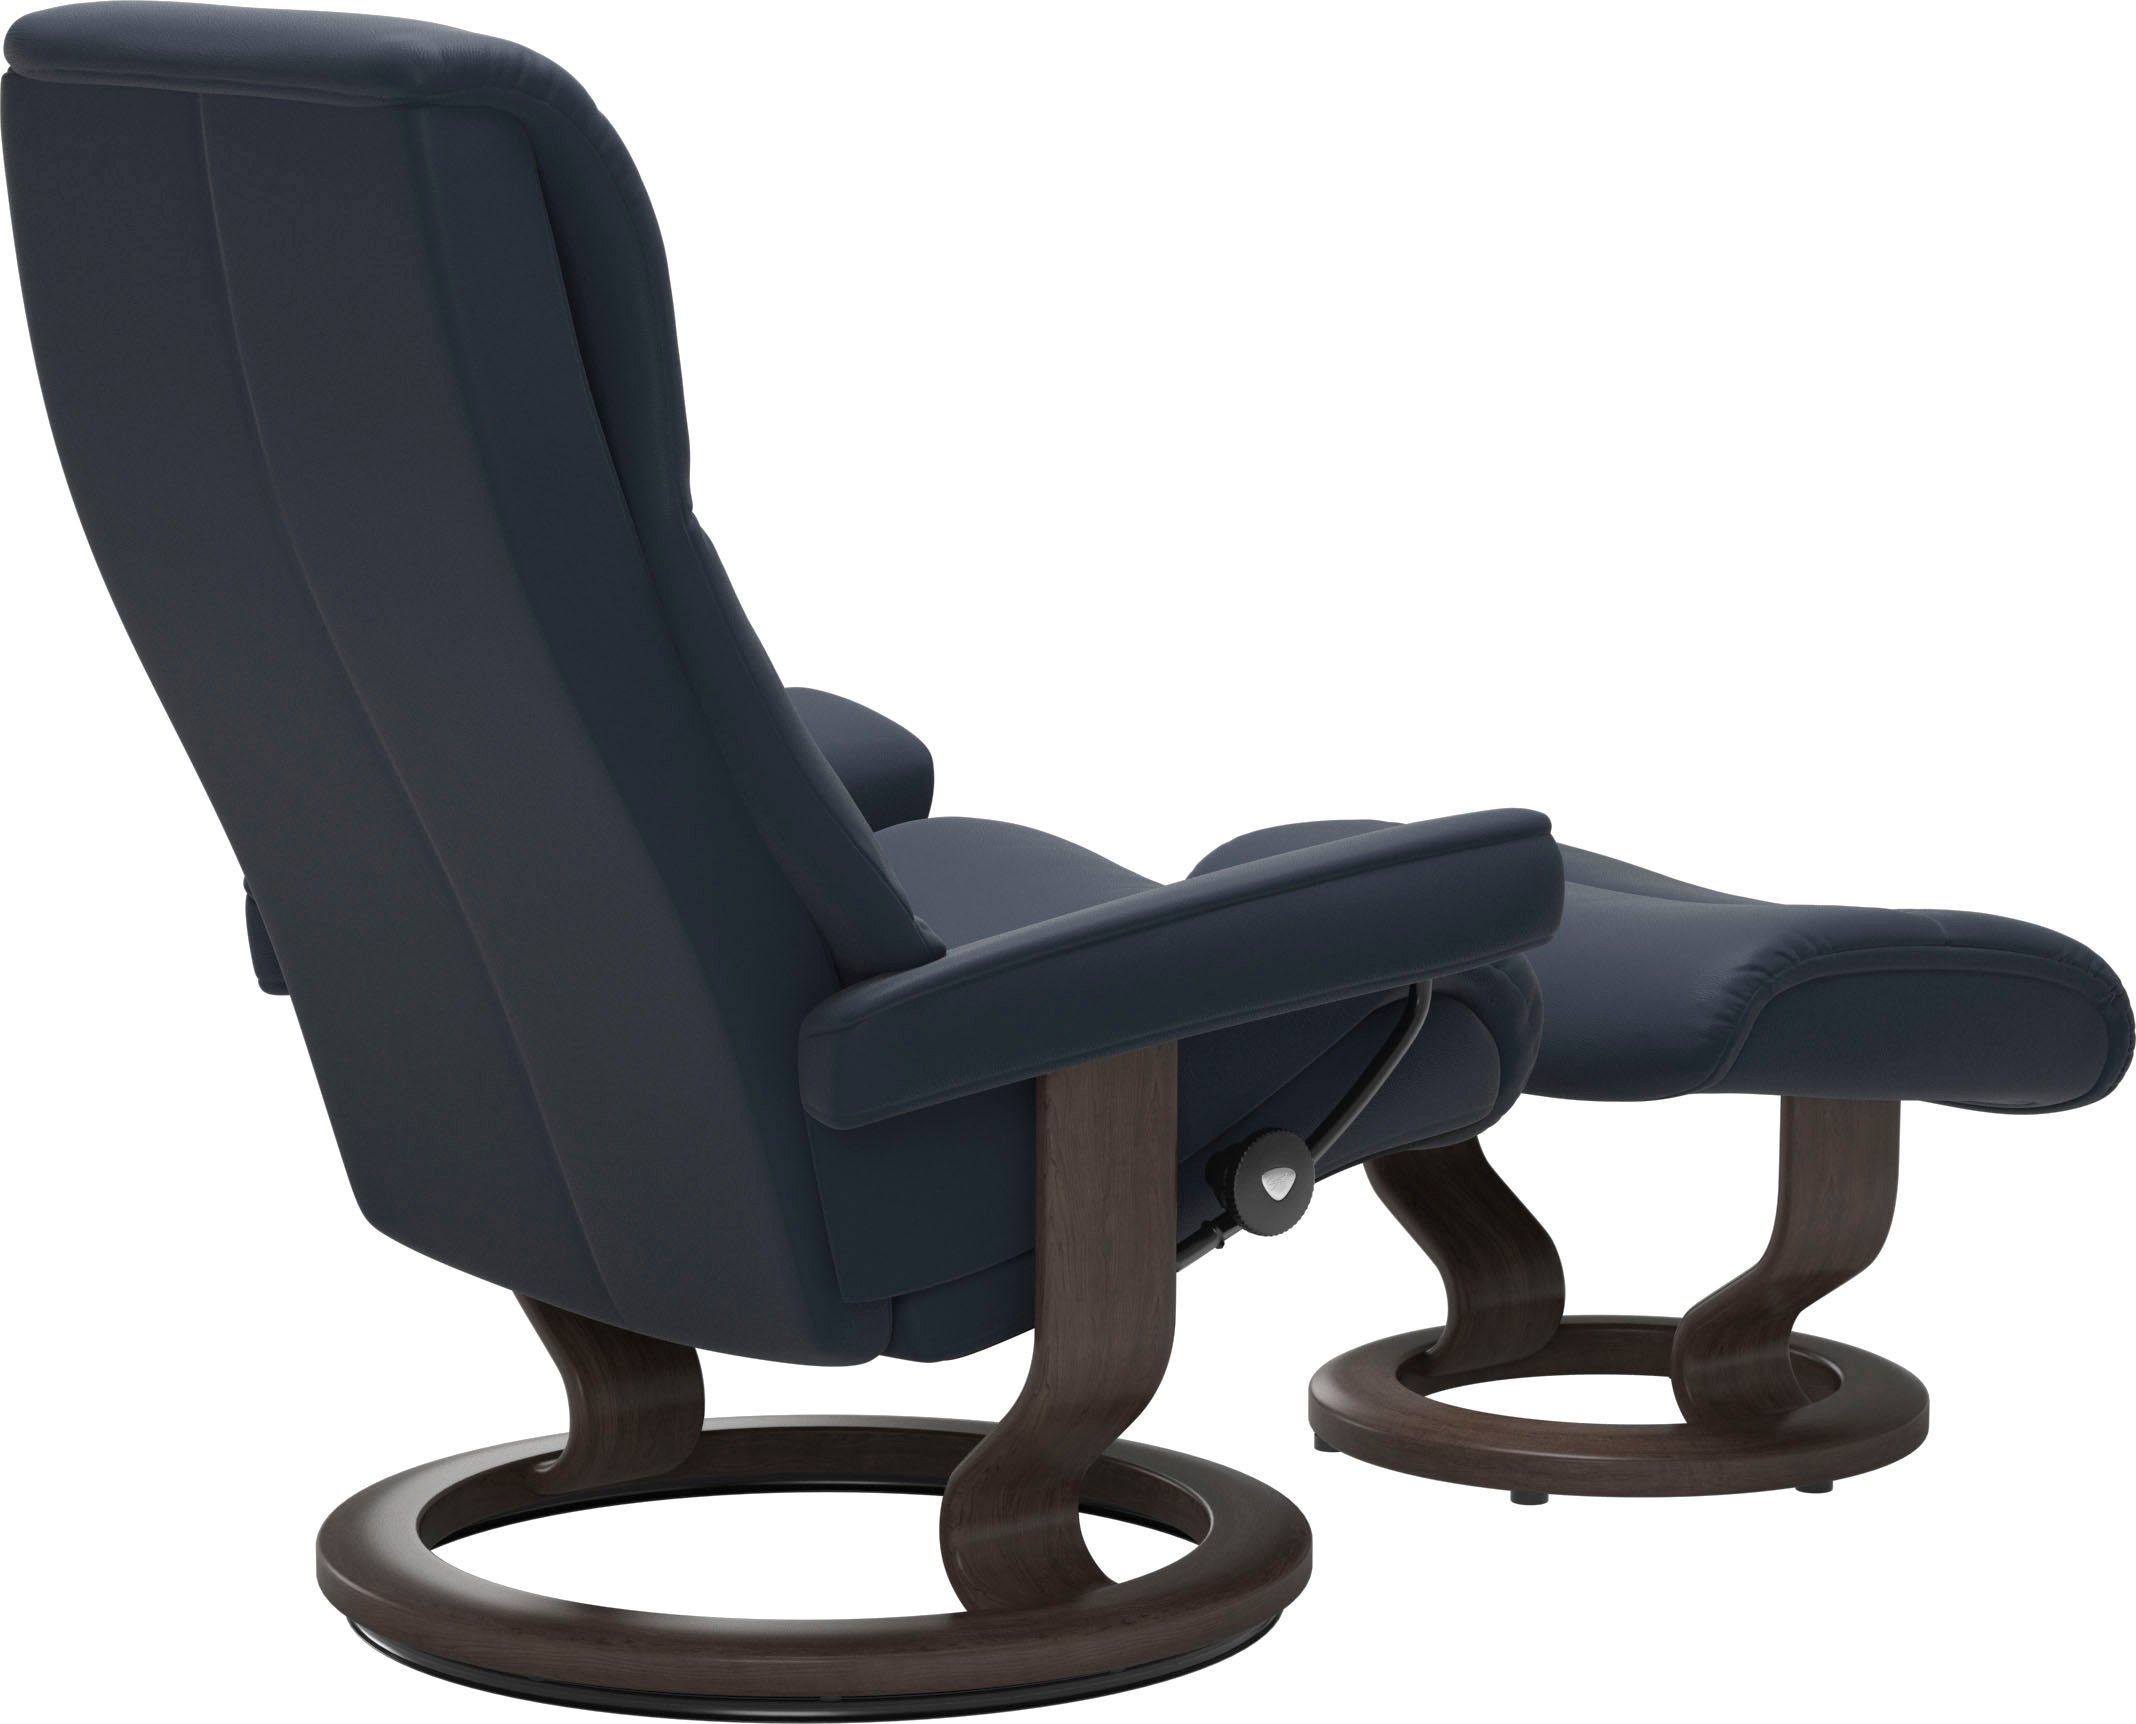 Stressless® Größe Classic M,Gestell mit Base, Wenge View, Relaxsessel